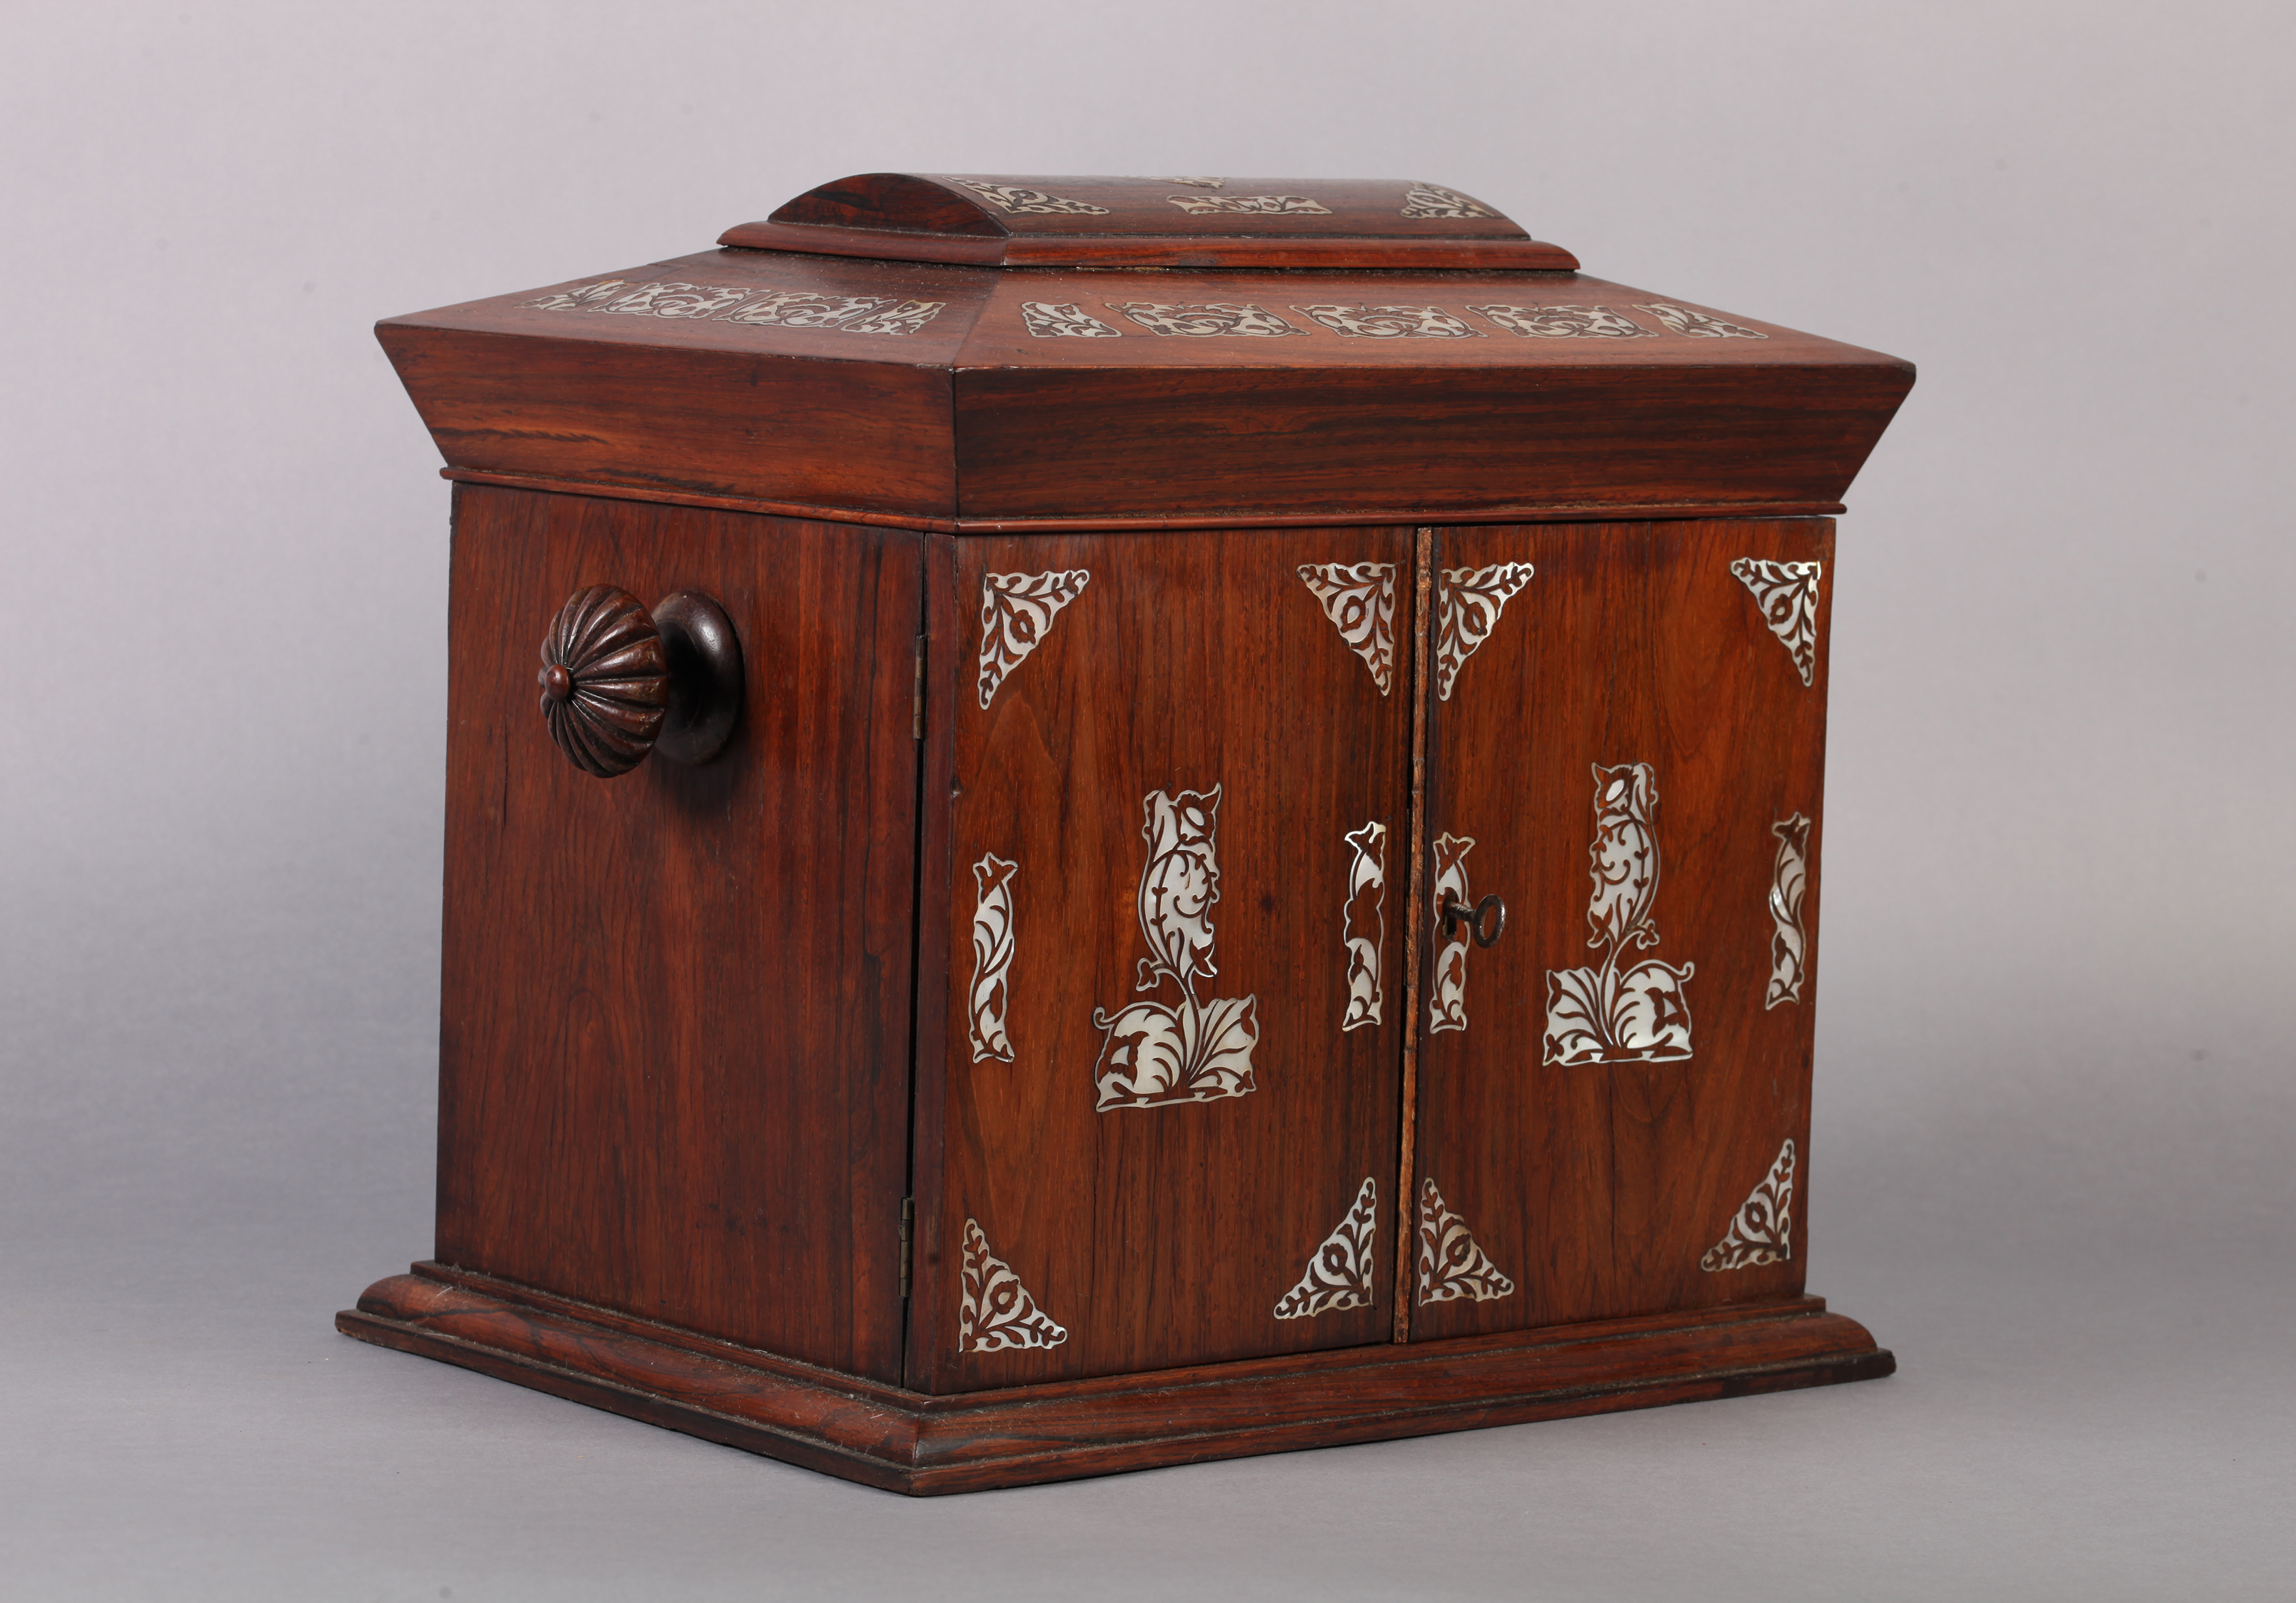 A VICTORIAN MOTHER OF PEARL INLAID ROSEWOOD TABLE CABINET with domed sarcophagus shaped hinged lid